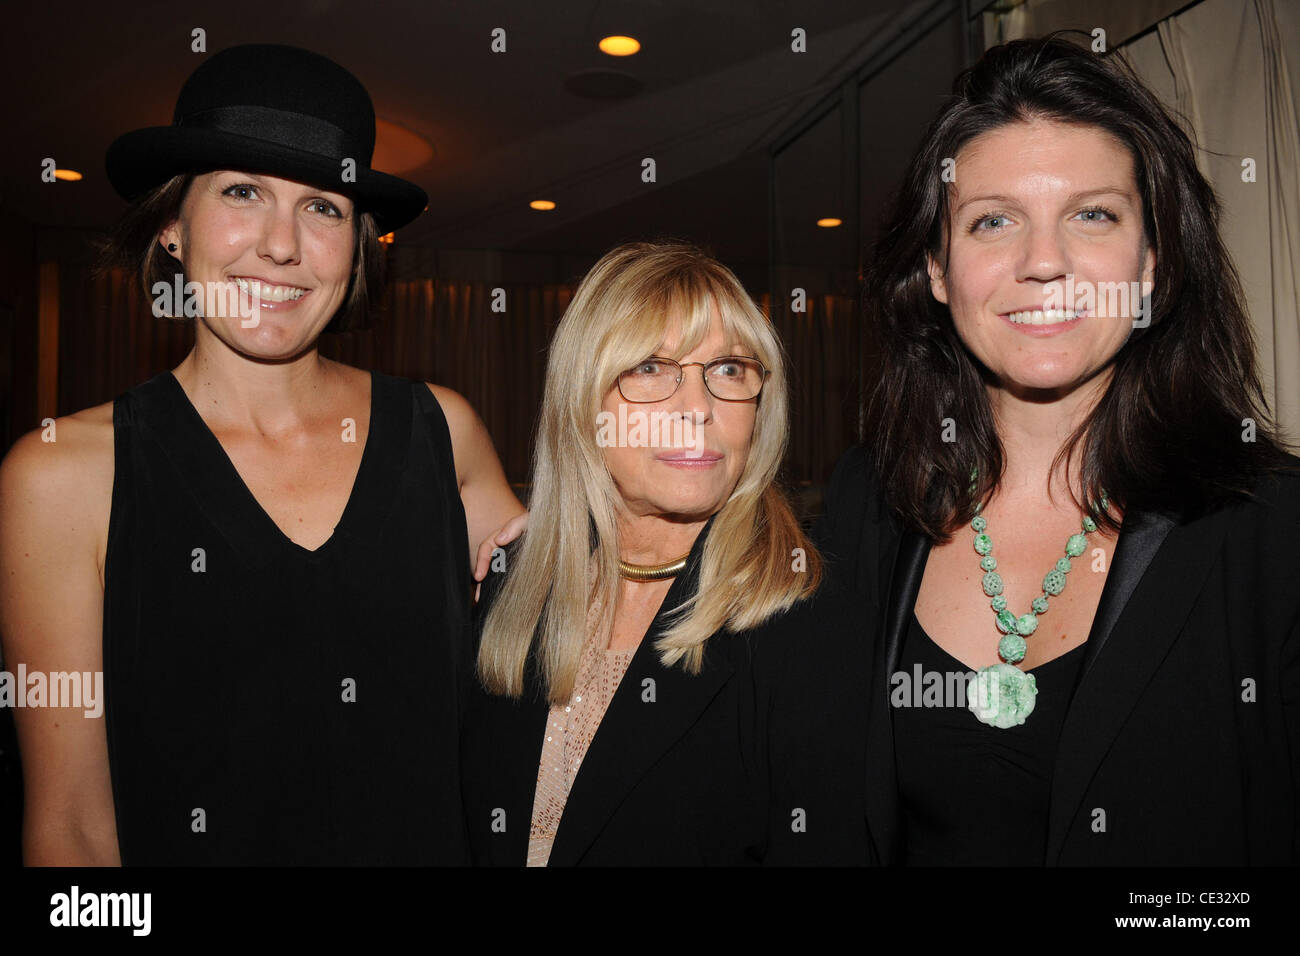 Nancy Sinatra poses with her daughters Amanda Erlinger and A.J. Lambert 'Come fly with us' - a launch party for wines from the Sinatra Family Estates at Patsy's Italian Restaurant New York City, USA - 30.09.10 Stock Photo